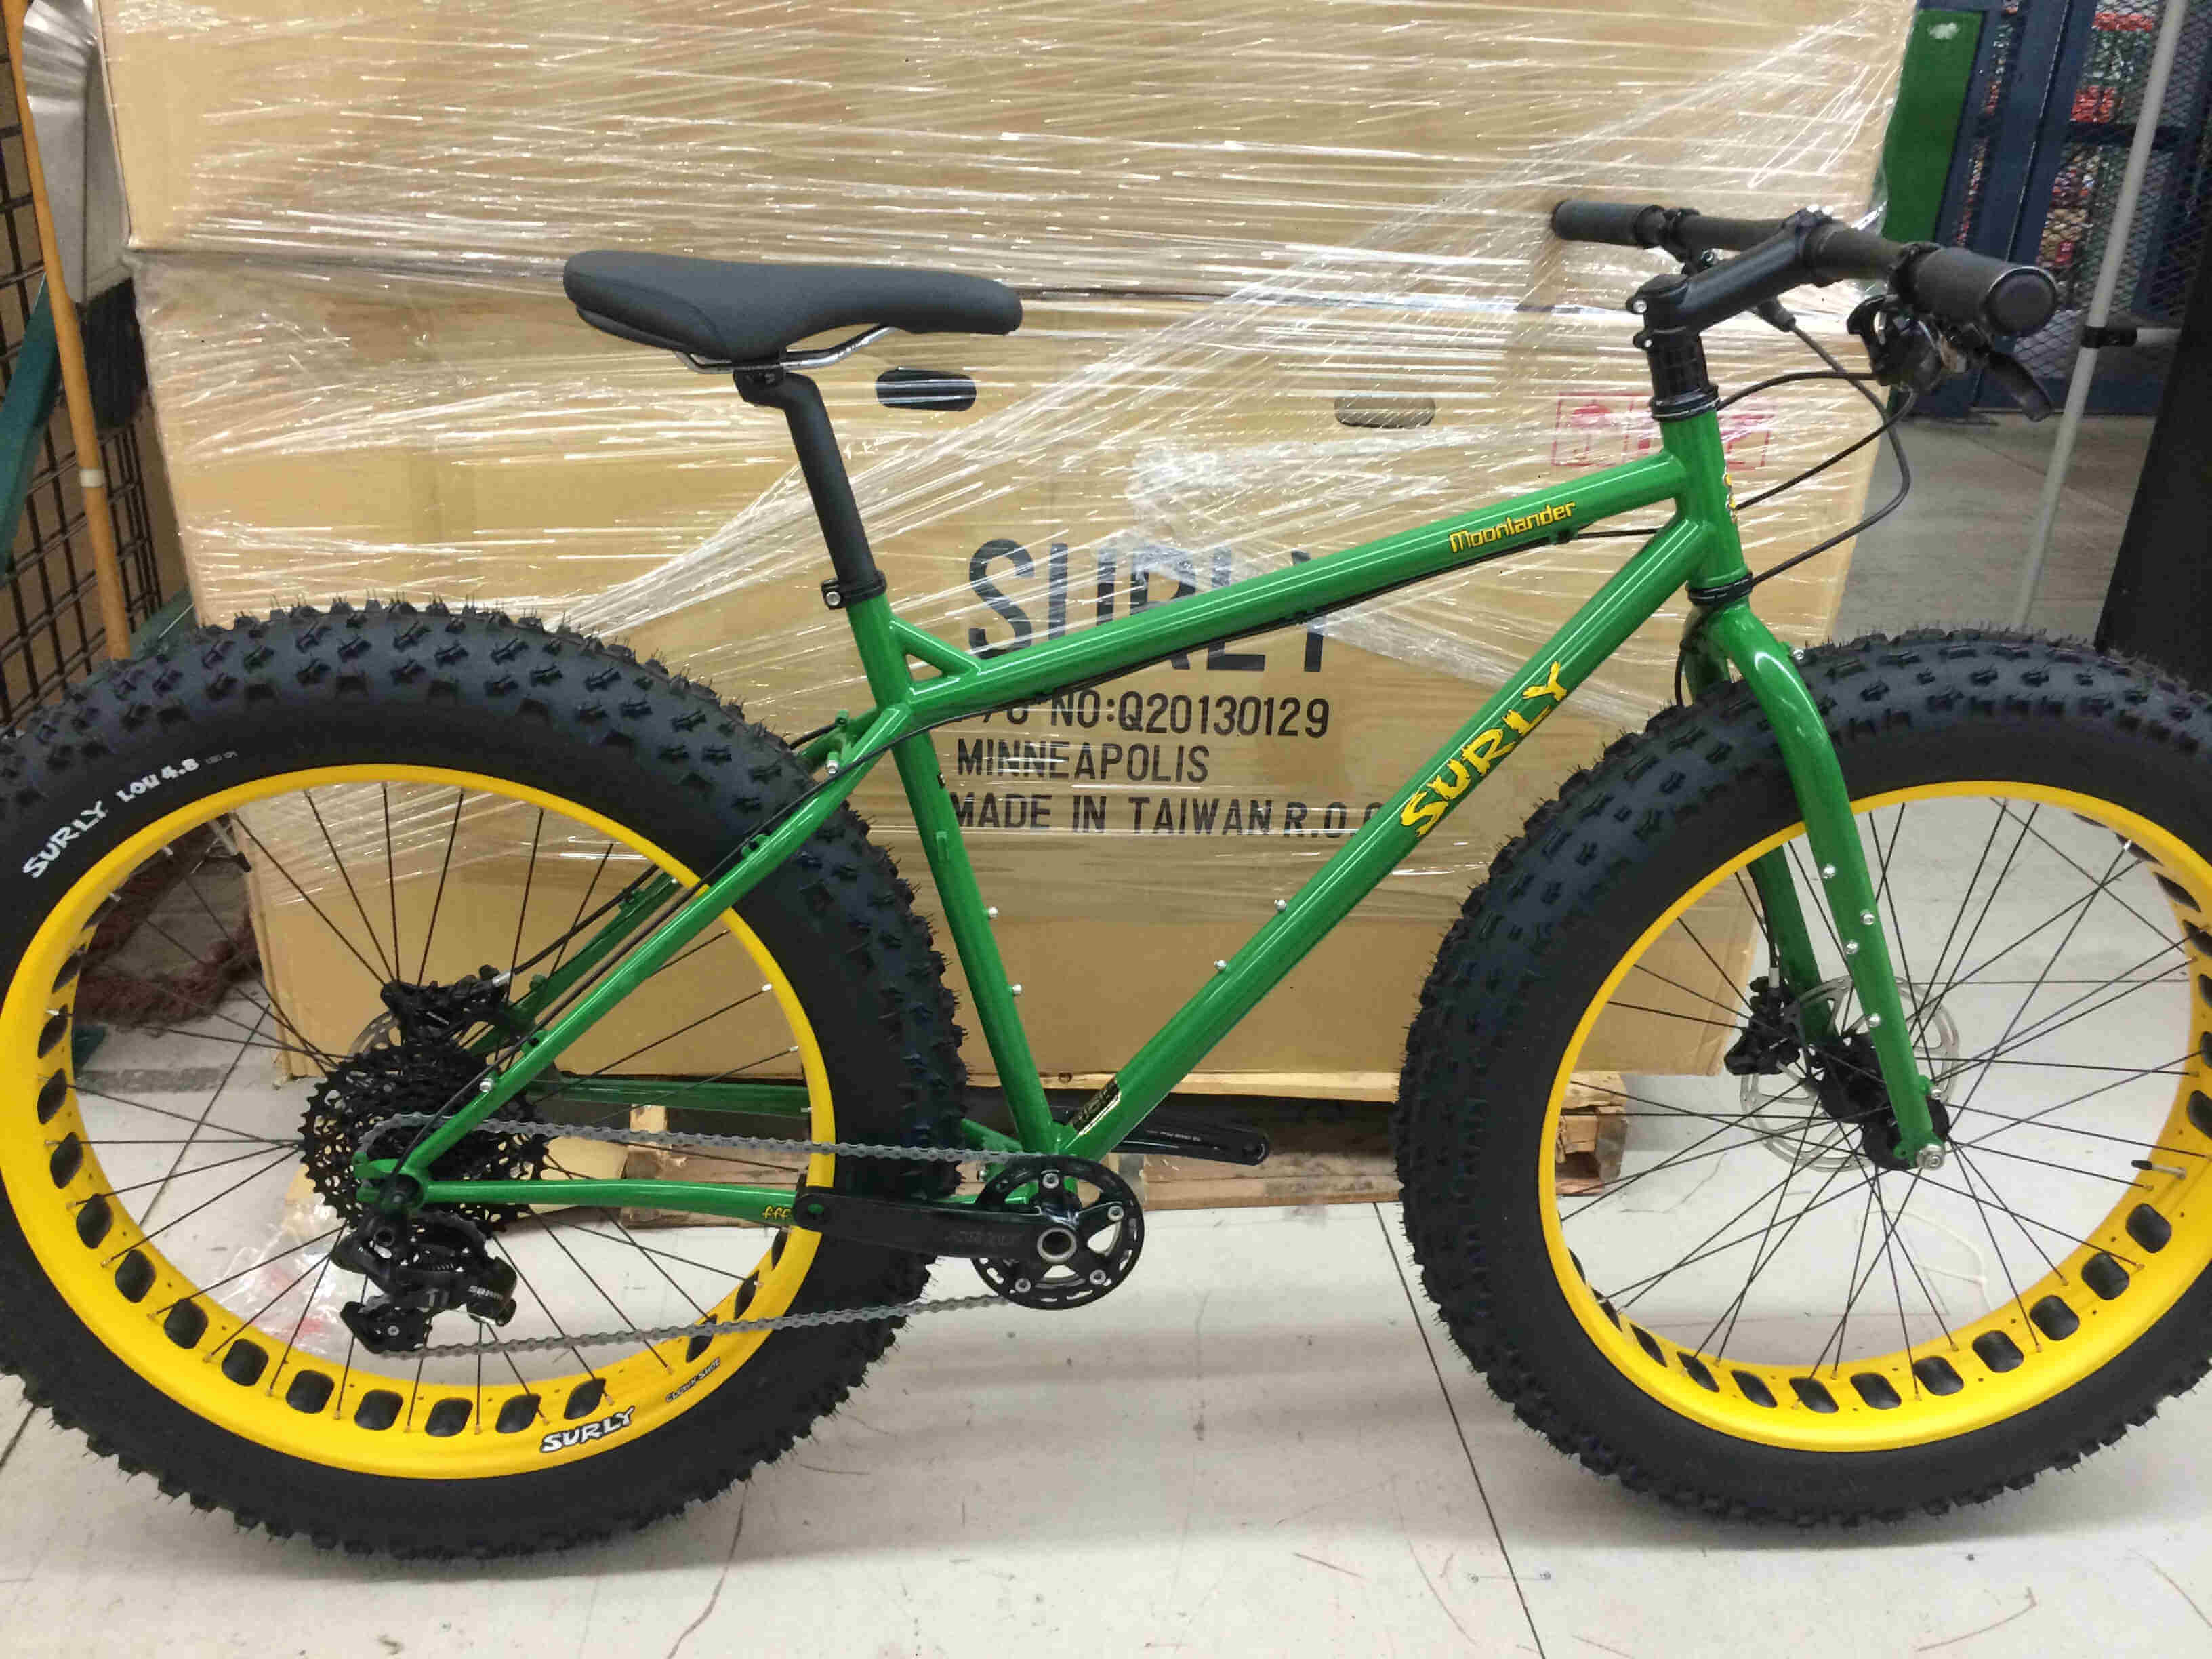 Right side view green Surly Moonlander fat bike, parked against a pallet of cardboard boxes, on a concrete floor